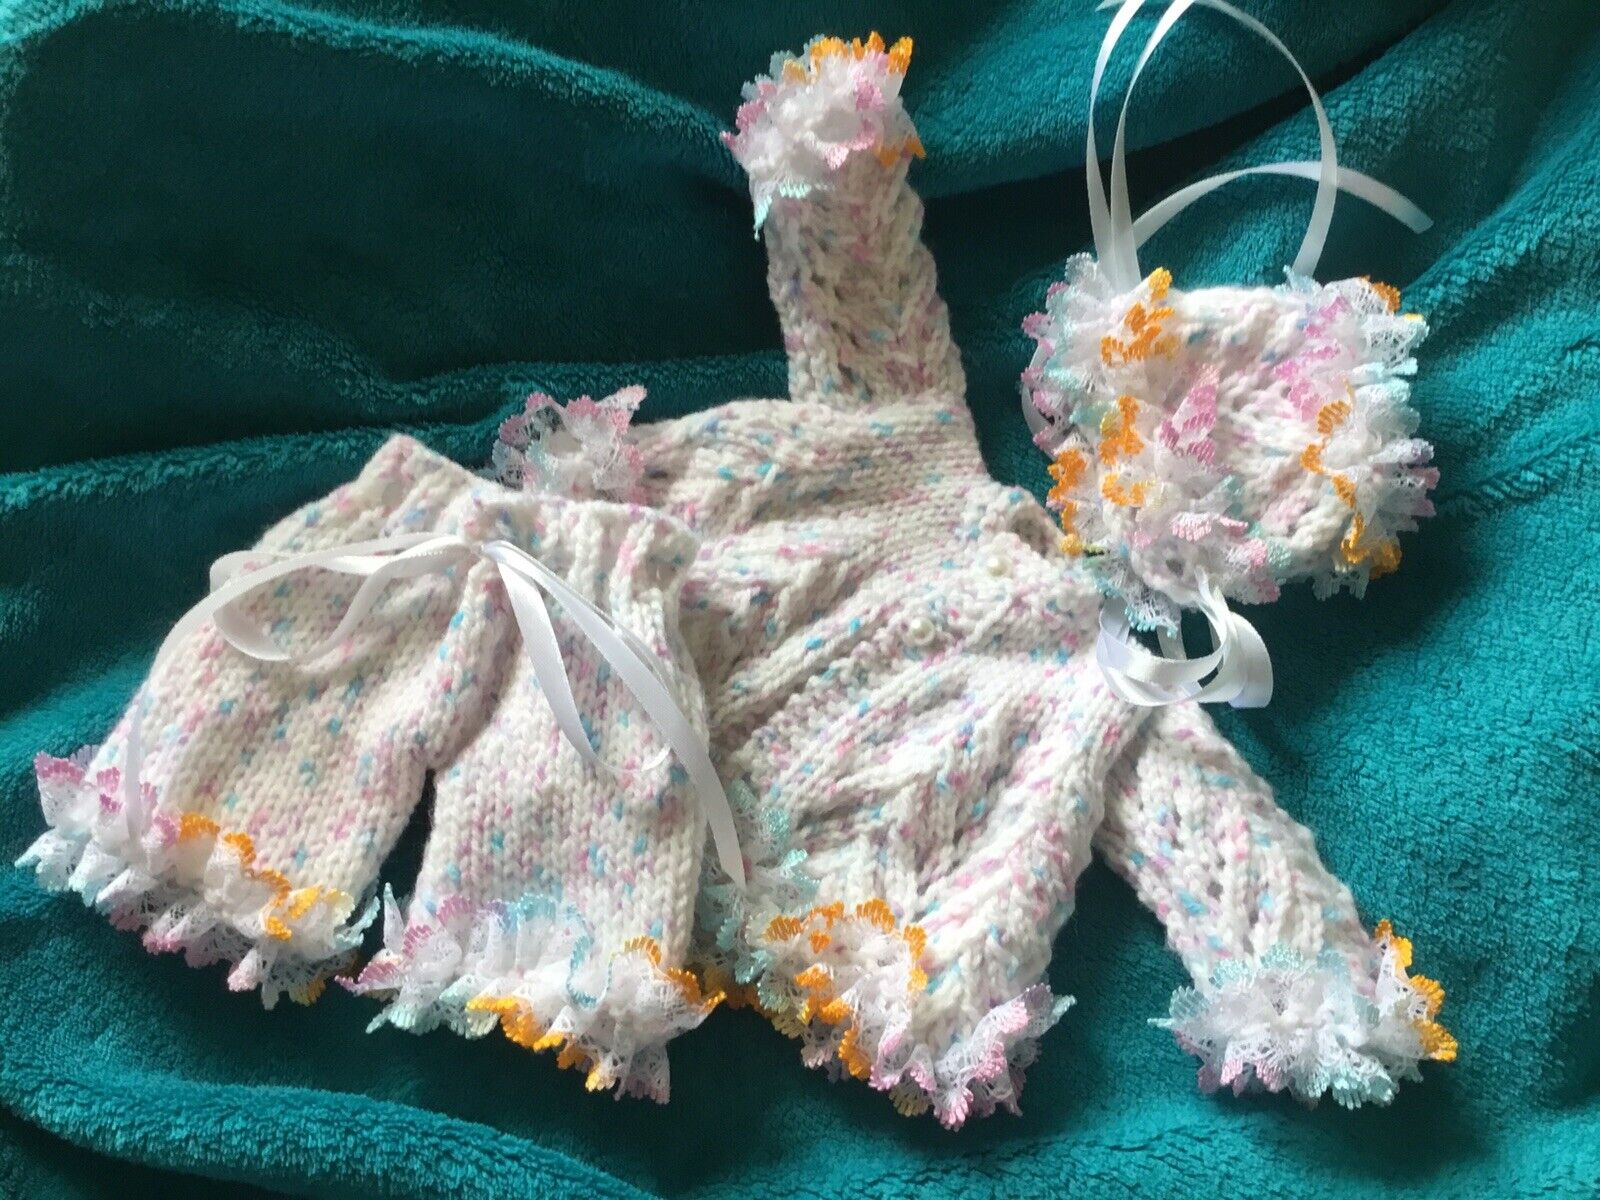 Hand Knitted dolls clothes to fit 10" Ashton Drake, Reborn, Ooak